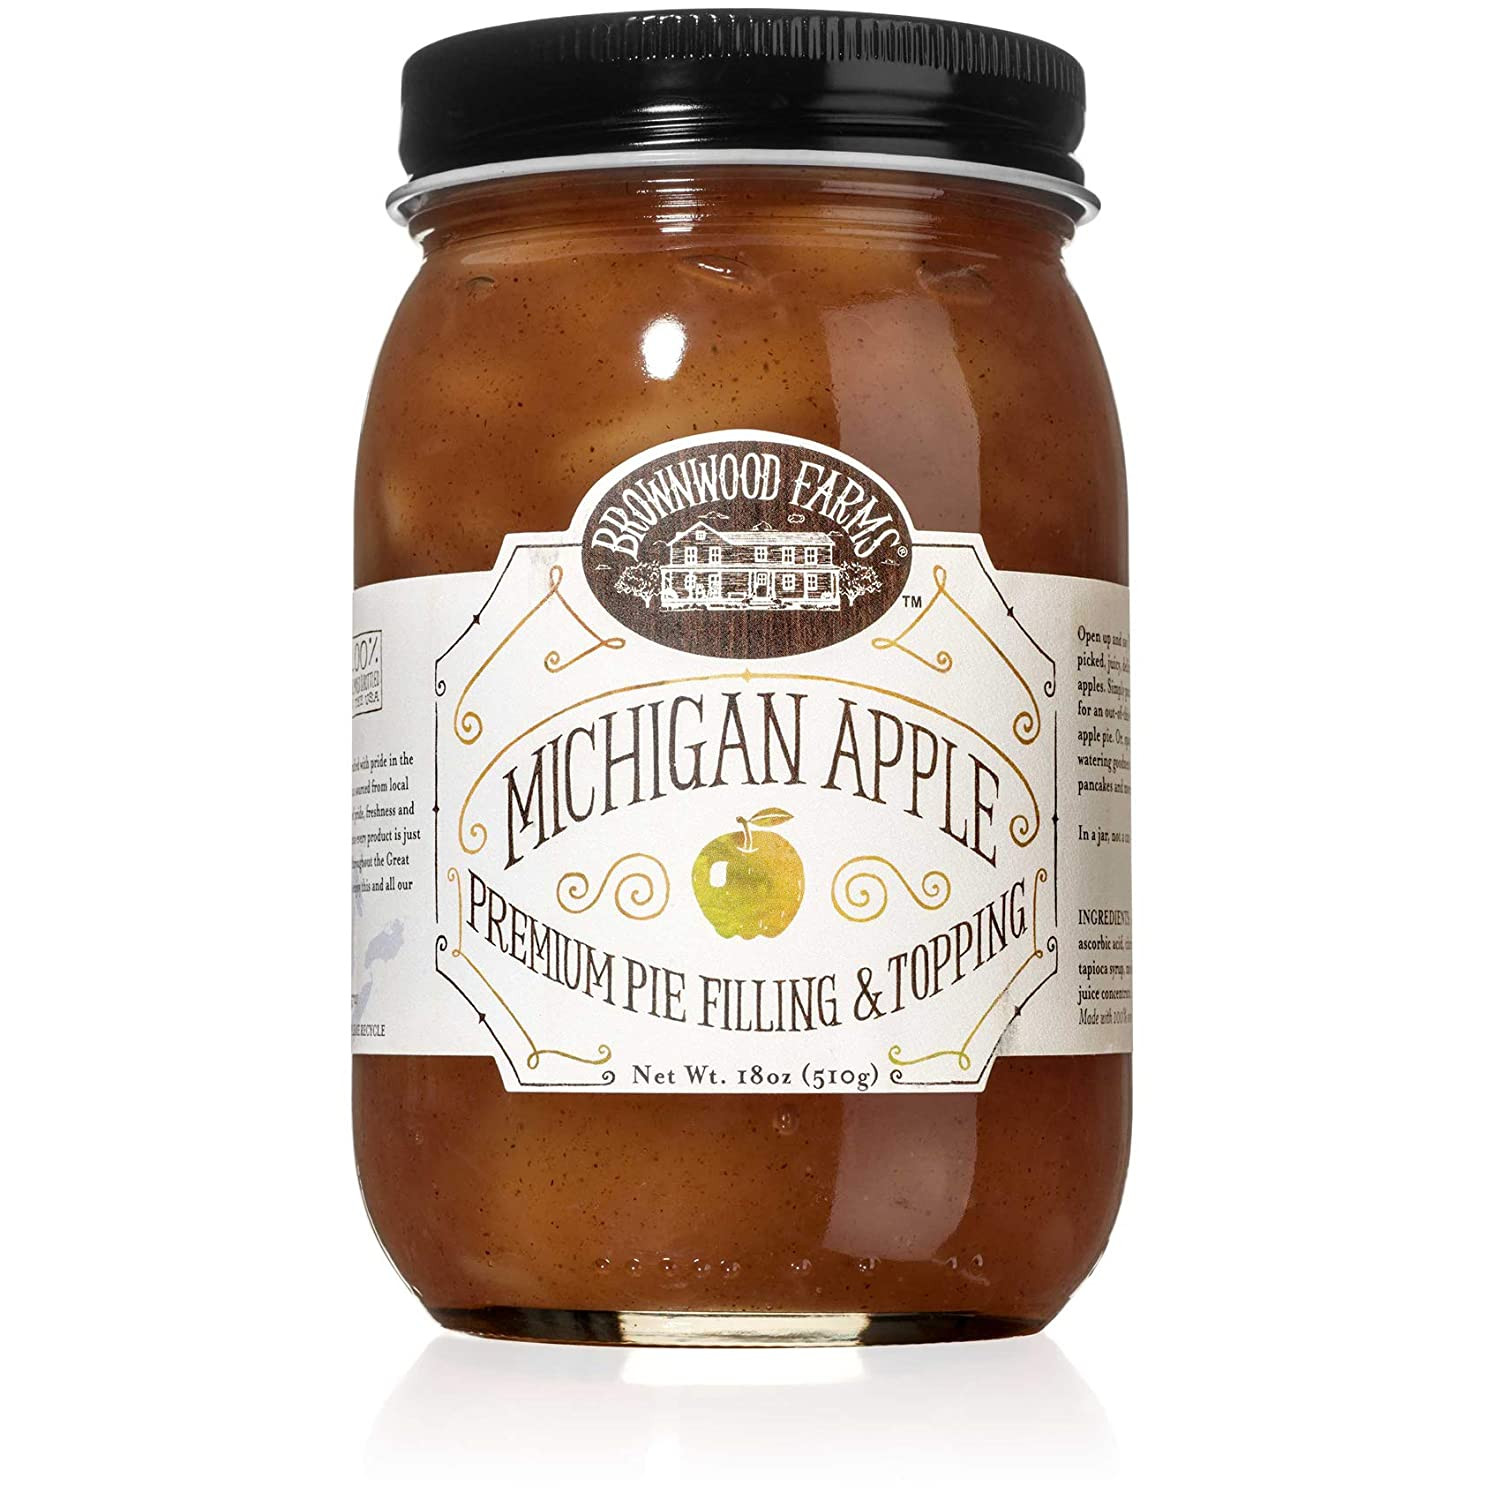 Canning Apple Pie Filling Without Clear Jel
 Top 10 Canning Apple Pie Filling Without Clear Jel Home